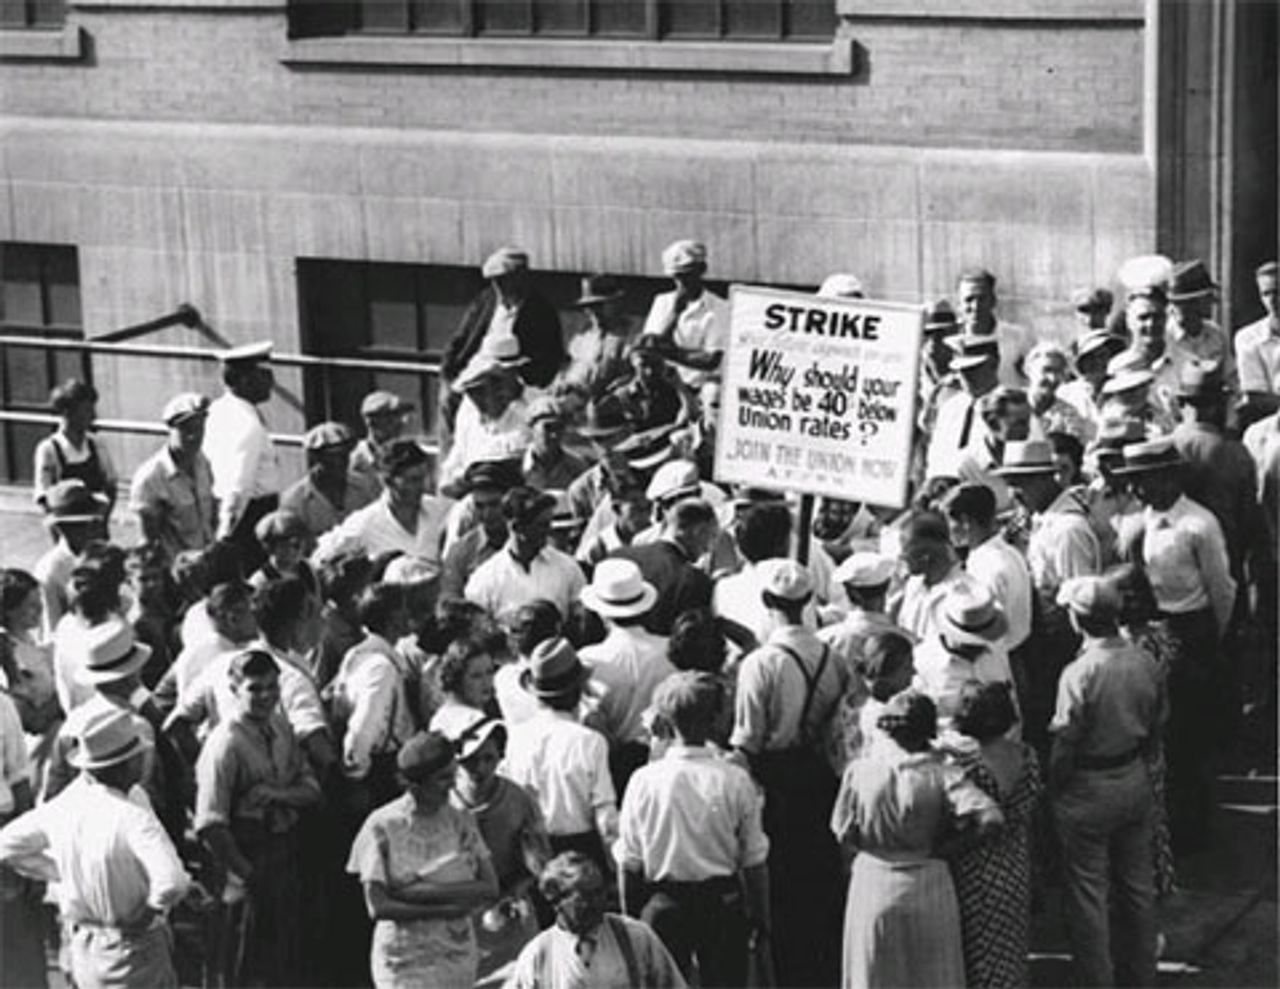 1935: Pickets and striking workers at the Strutwear Knitting Company, Minneapolis